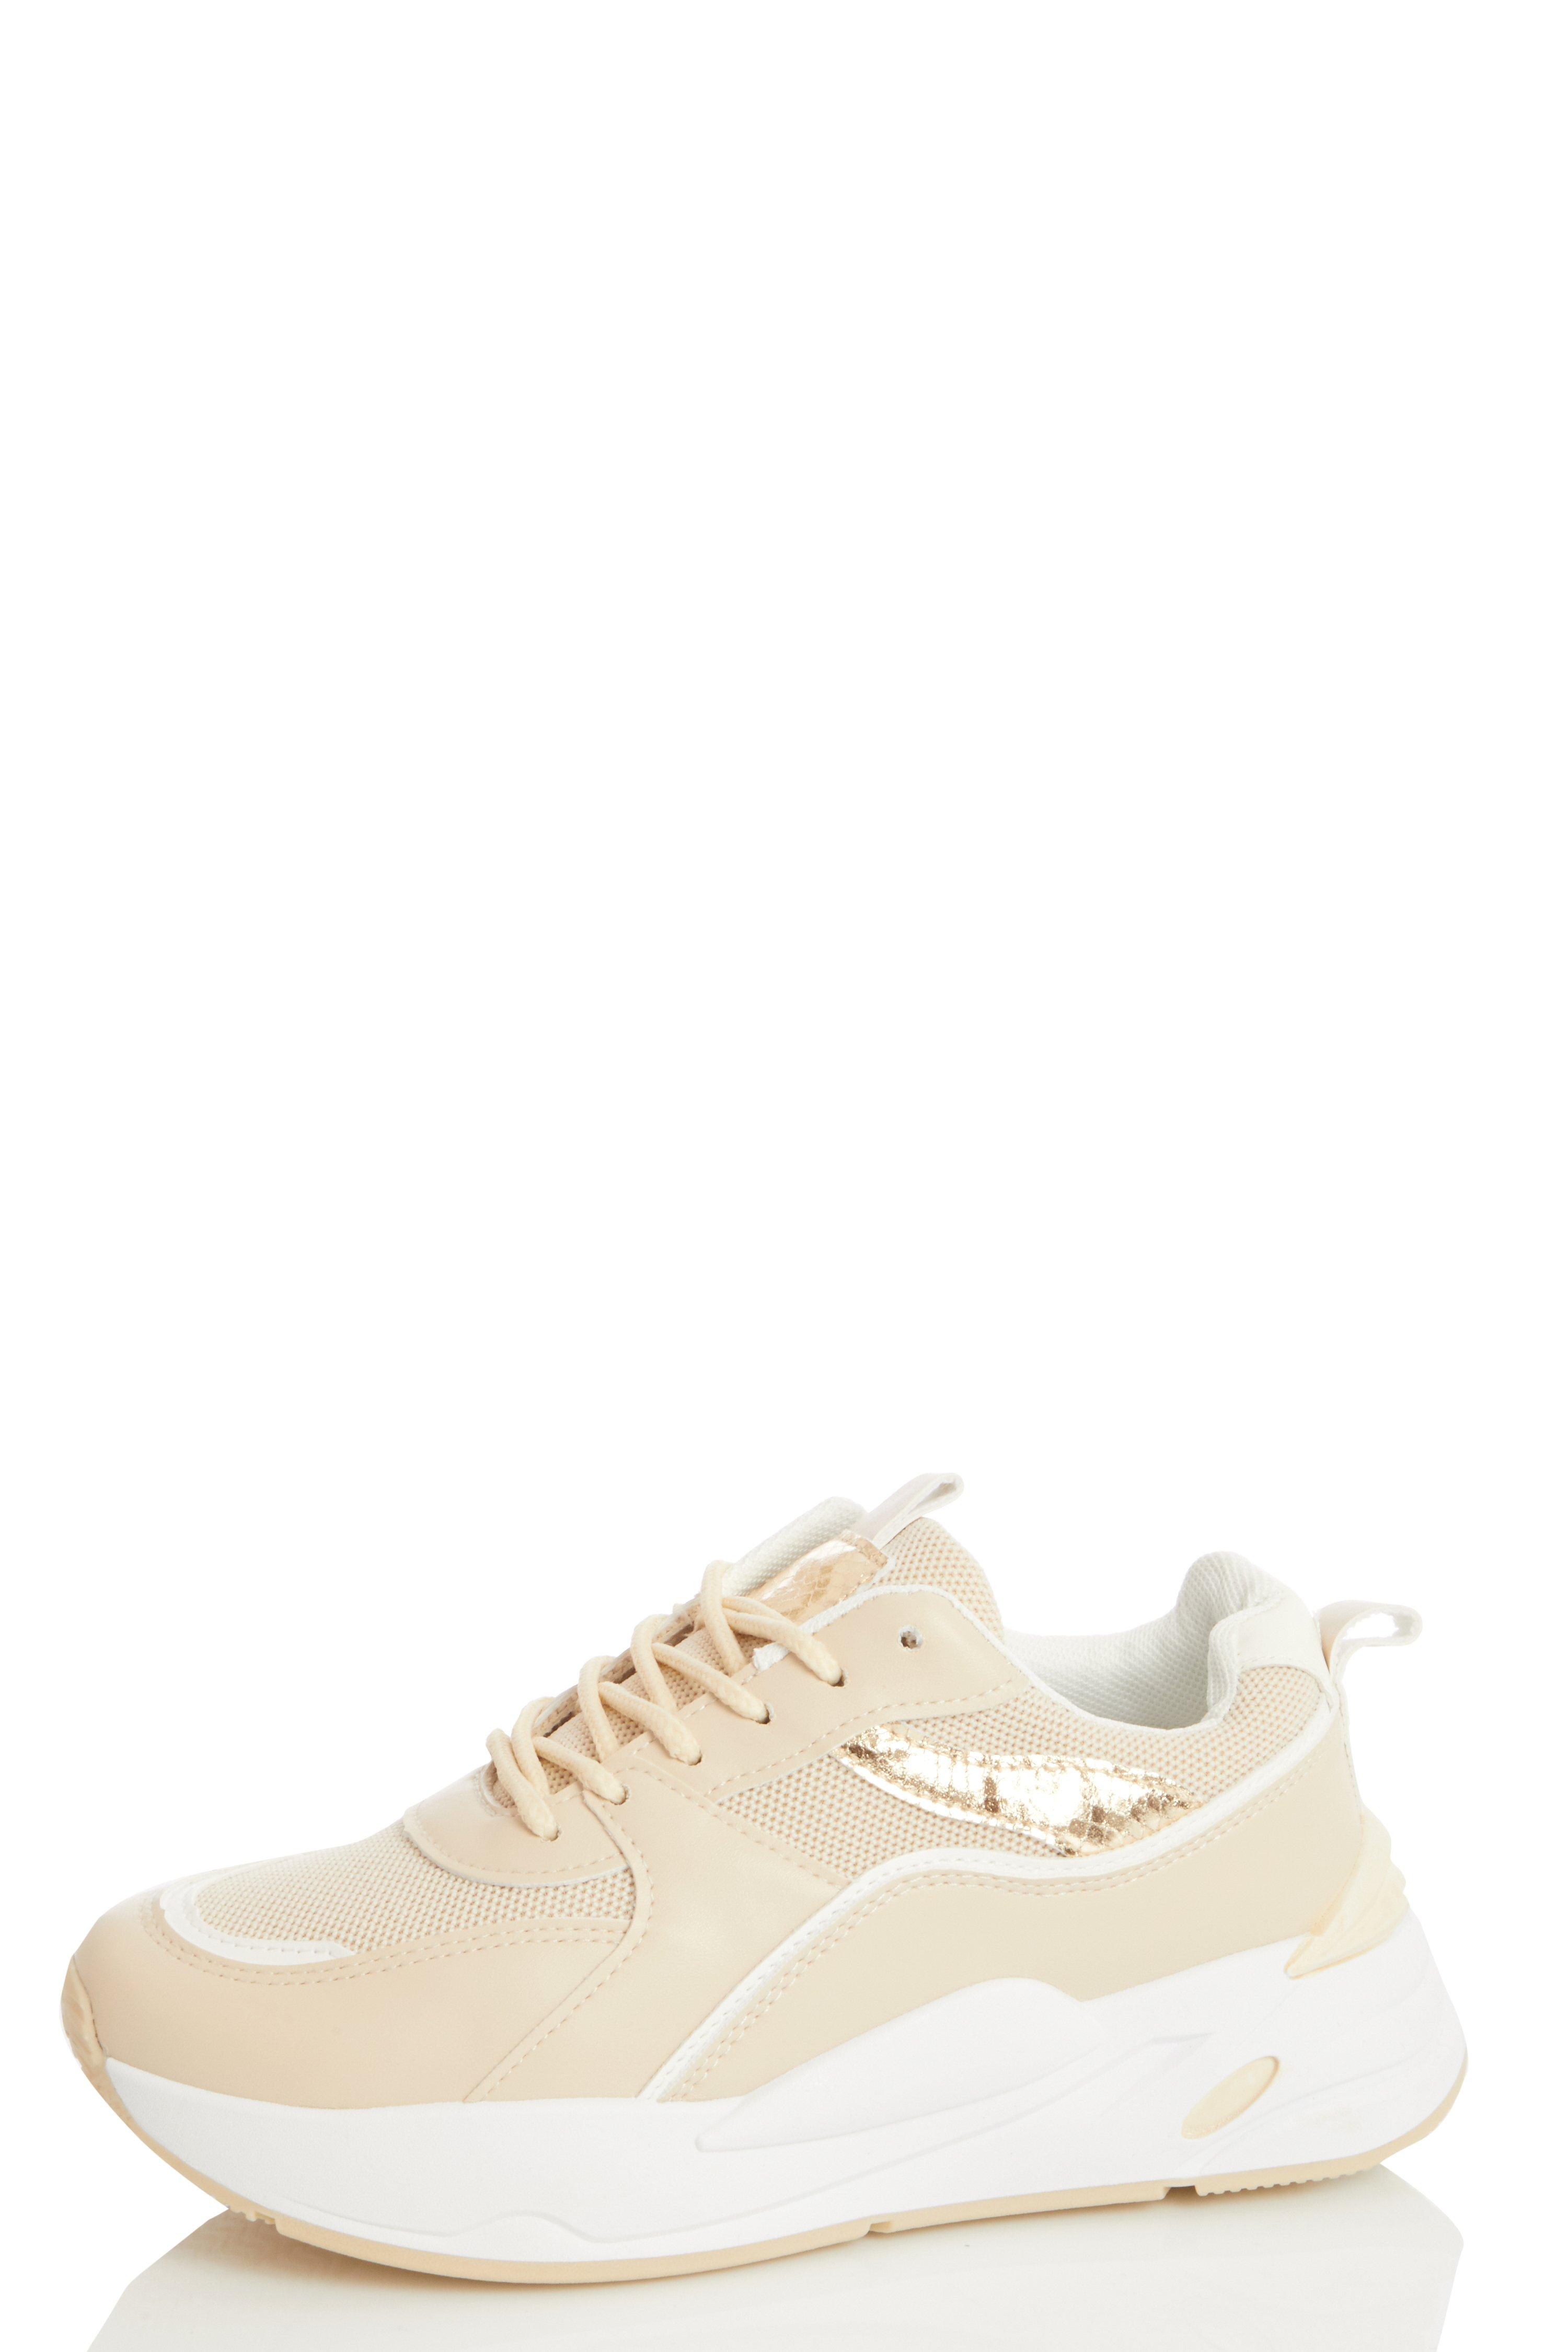 Women’s Trainers | White & Chunky Trainers | QUIZ Clothing